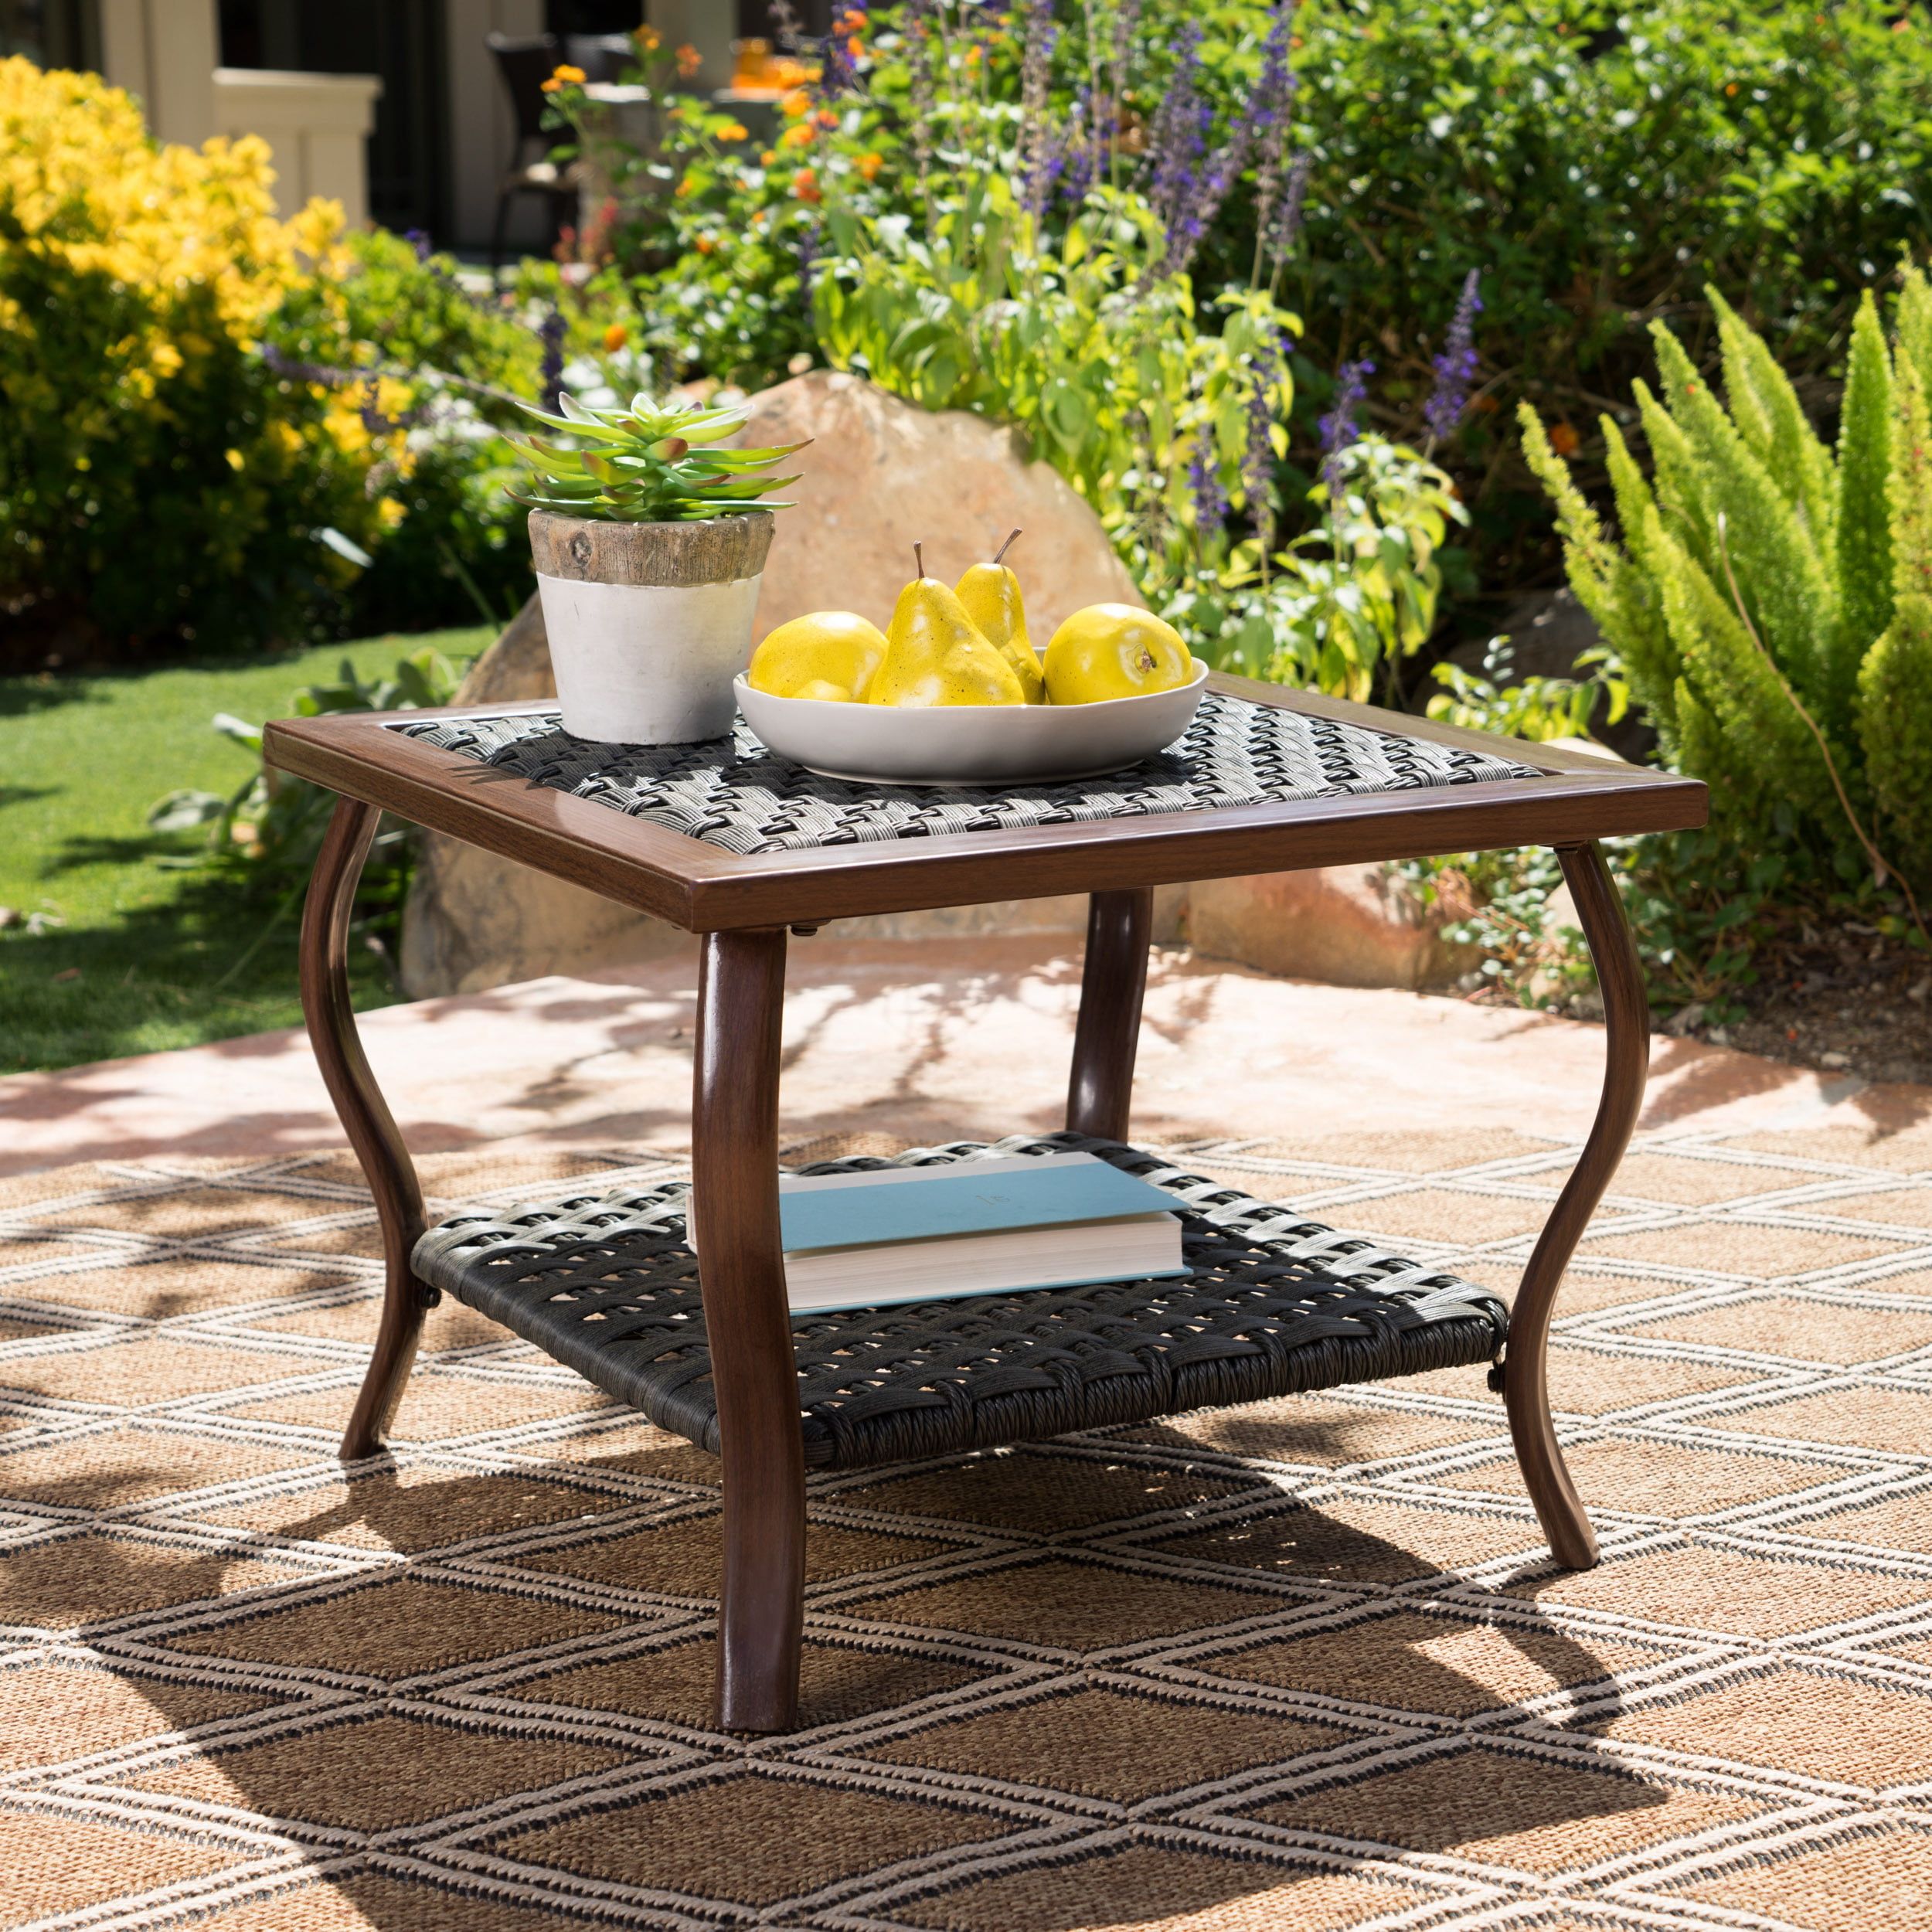 Santos Outdoor Wicker Coffee Table With Wood Finished Metal Legs, Grey In Outdoor Coffee Tables With Storage (Gallery 19 of 20)